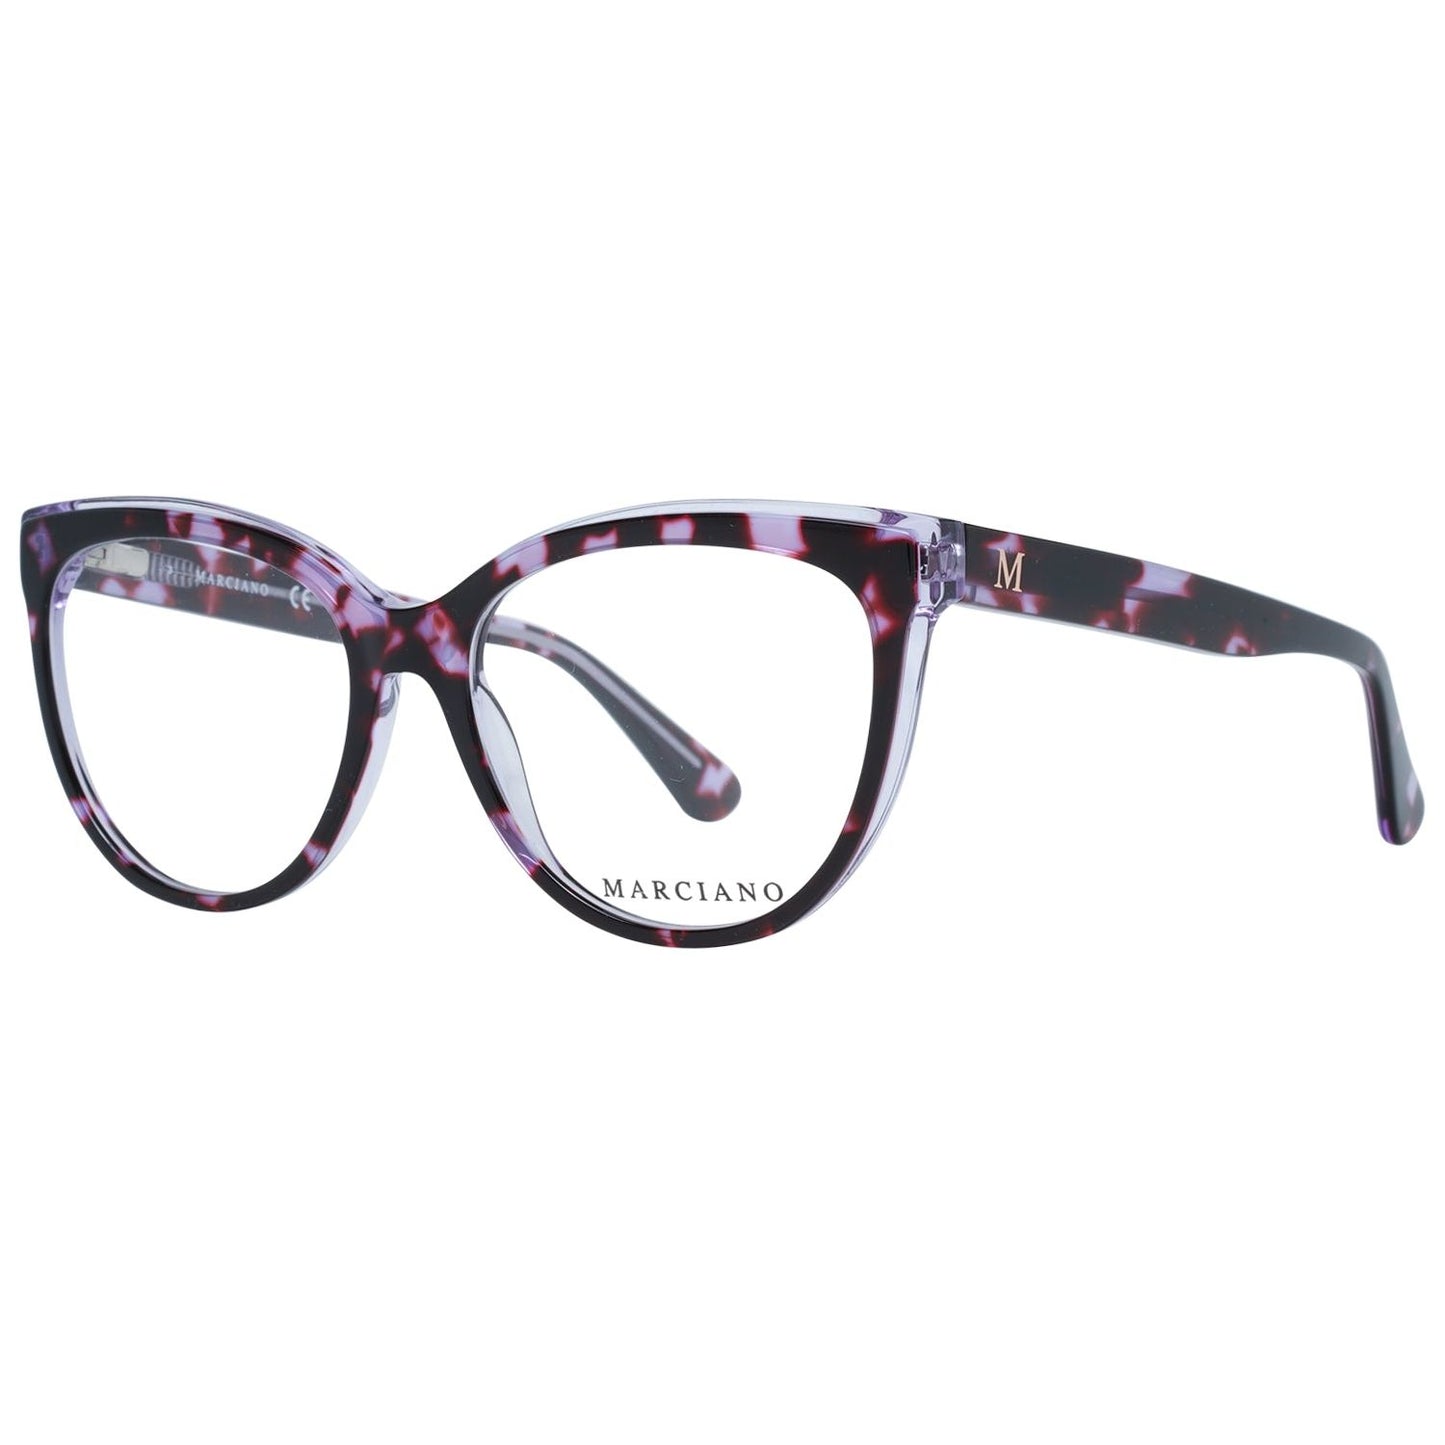 MARCIANO By GUESS EYEWEAR MARCIANO BY GUESS MOD. GM0377 54083 SUNGLASSES & EYEWEAR marciano-by-guess-mod-gm0377-54083